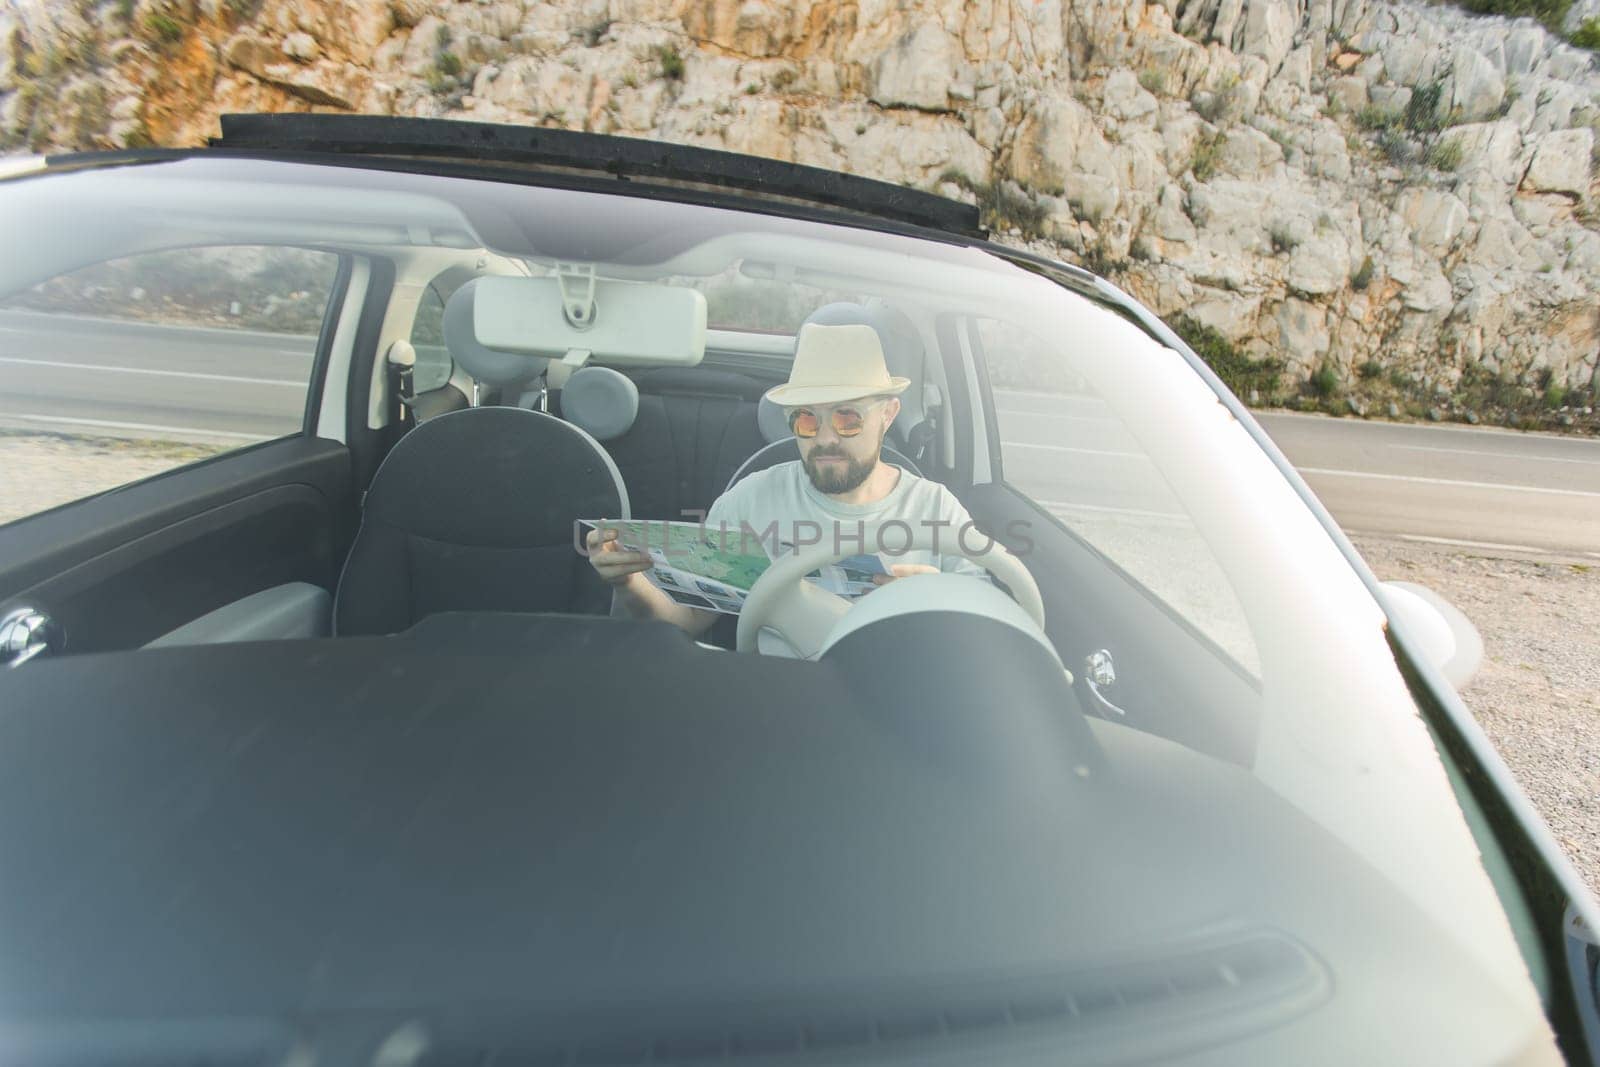 Hipster man looking on location navigation map in car, tourist traveler driving and hold in male hands europe cartography, view and plan tourist way road, trip in transportation cabriolet auto by Satura86